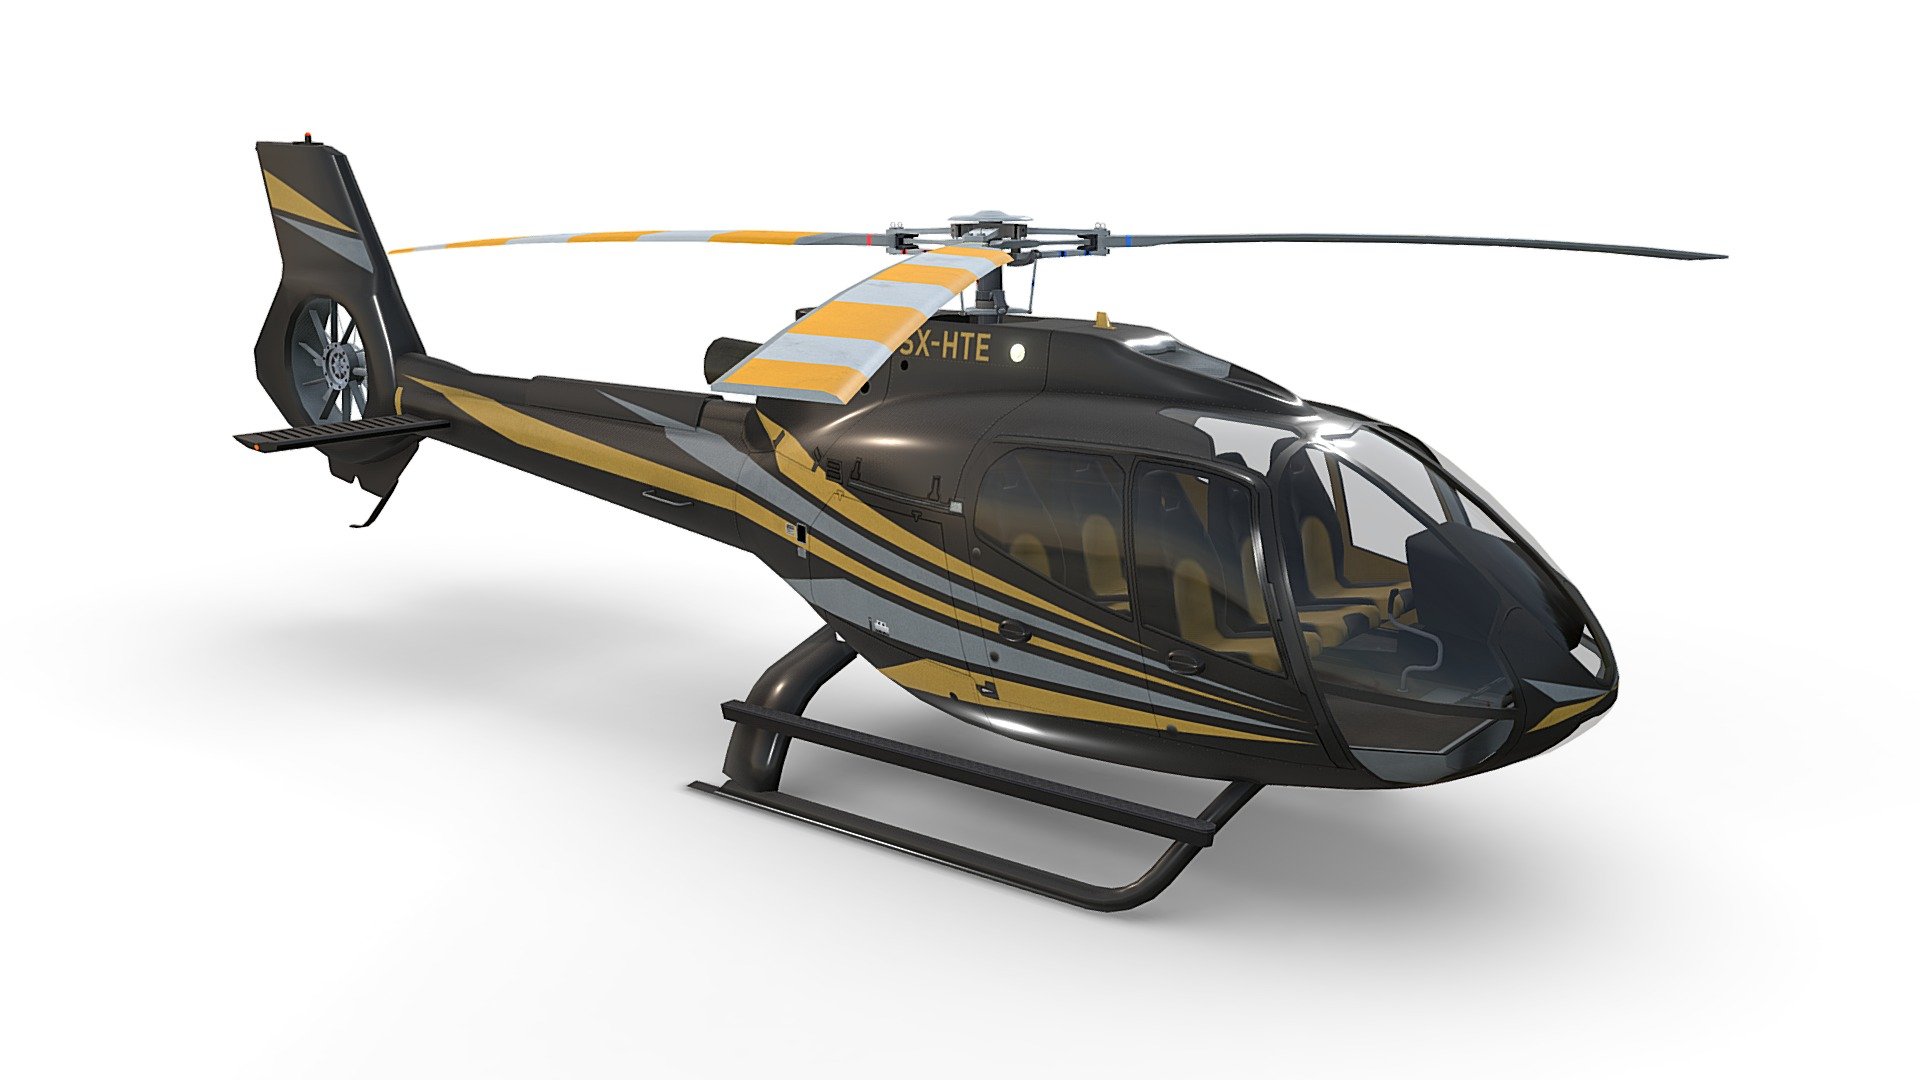 Generic Helicopter Airbus H130 Livery 3. Game ready, realtime optimized Airbus Helicopter H130 with high visual accuracy. Both PBR workflows ready native 4096 x 4096 px textures. Clean lowpoly mesh with 4 preconfigured level of details LOD0 19710 tris, LOD1 10462 tris, LOD2 7388 tris, LOD3 5990 tris. Properly placed rotors pivots for flawless rotations. Simple capsule built interior that fits perfectly the body. 100% human controlled triangulation. All parts 100% unwrapped non-overlapping. Made using blueprints in real world scale meters. Included are flawless files .max (native 3dsmax 2014), .fbx, and .obj. All LOD are exported seperately and together in each file format 3d model